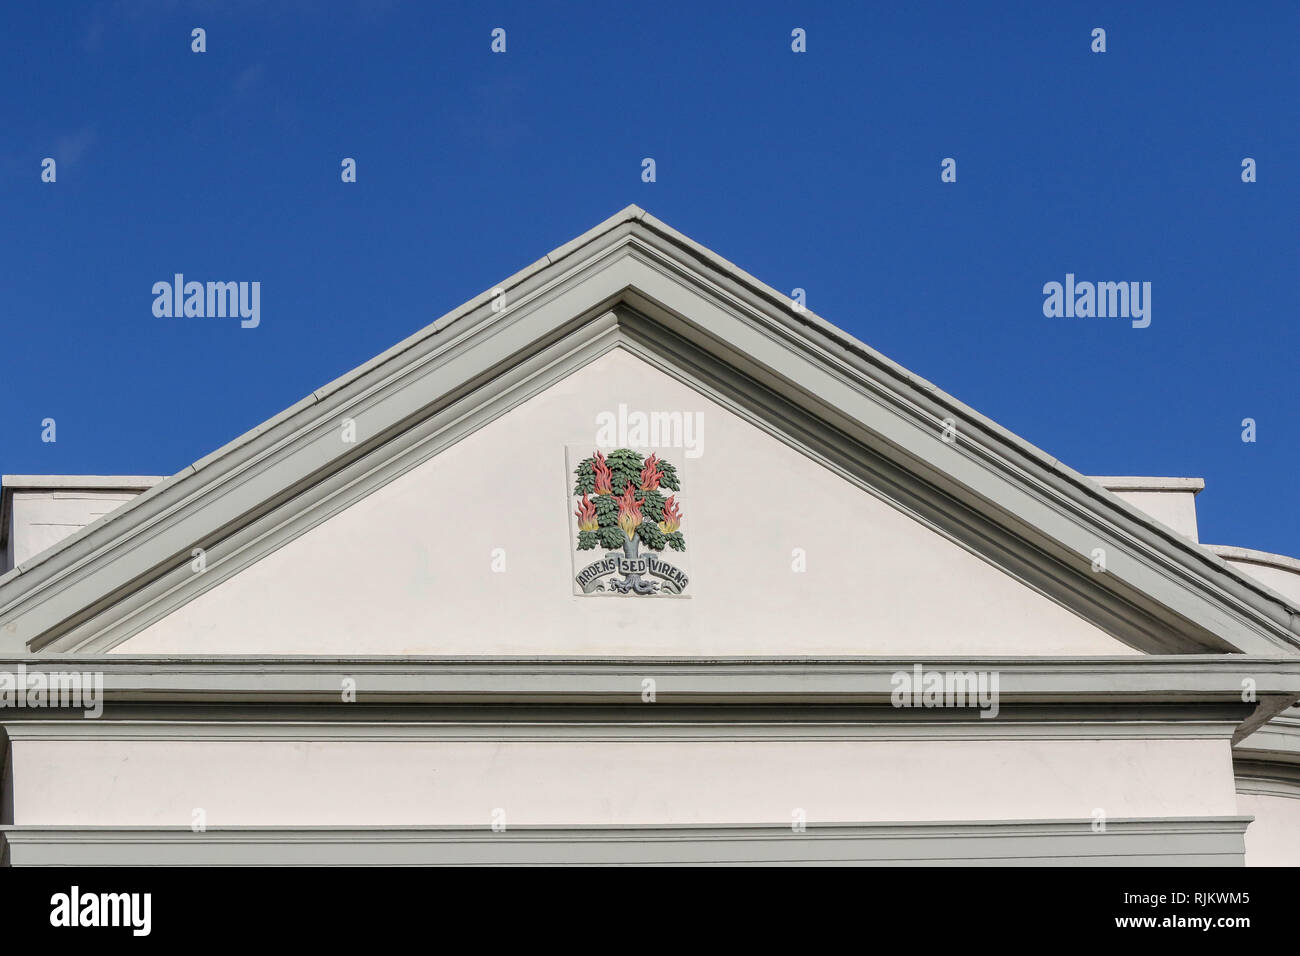 Presbyterian Church portico with the Ardens sed Virens motto and logo on white background. Stock Photo